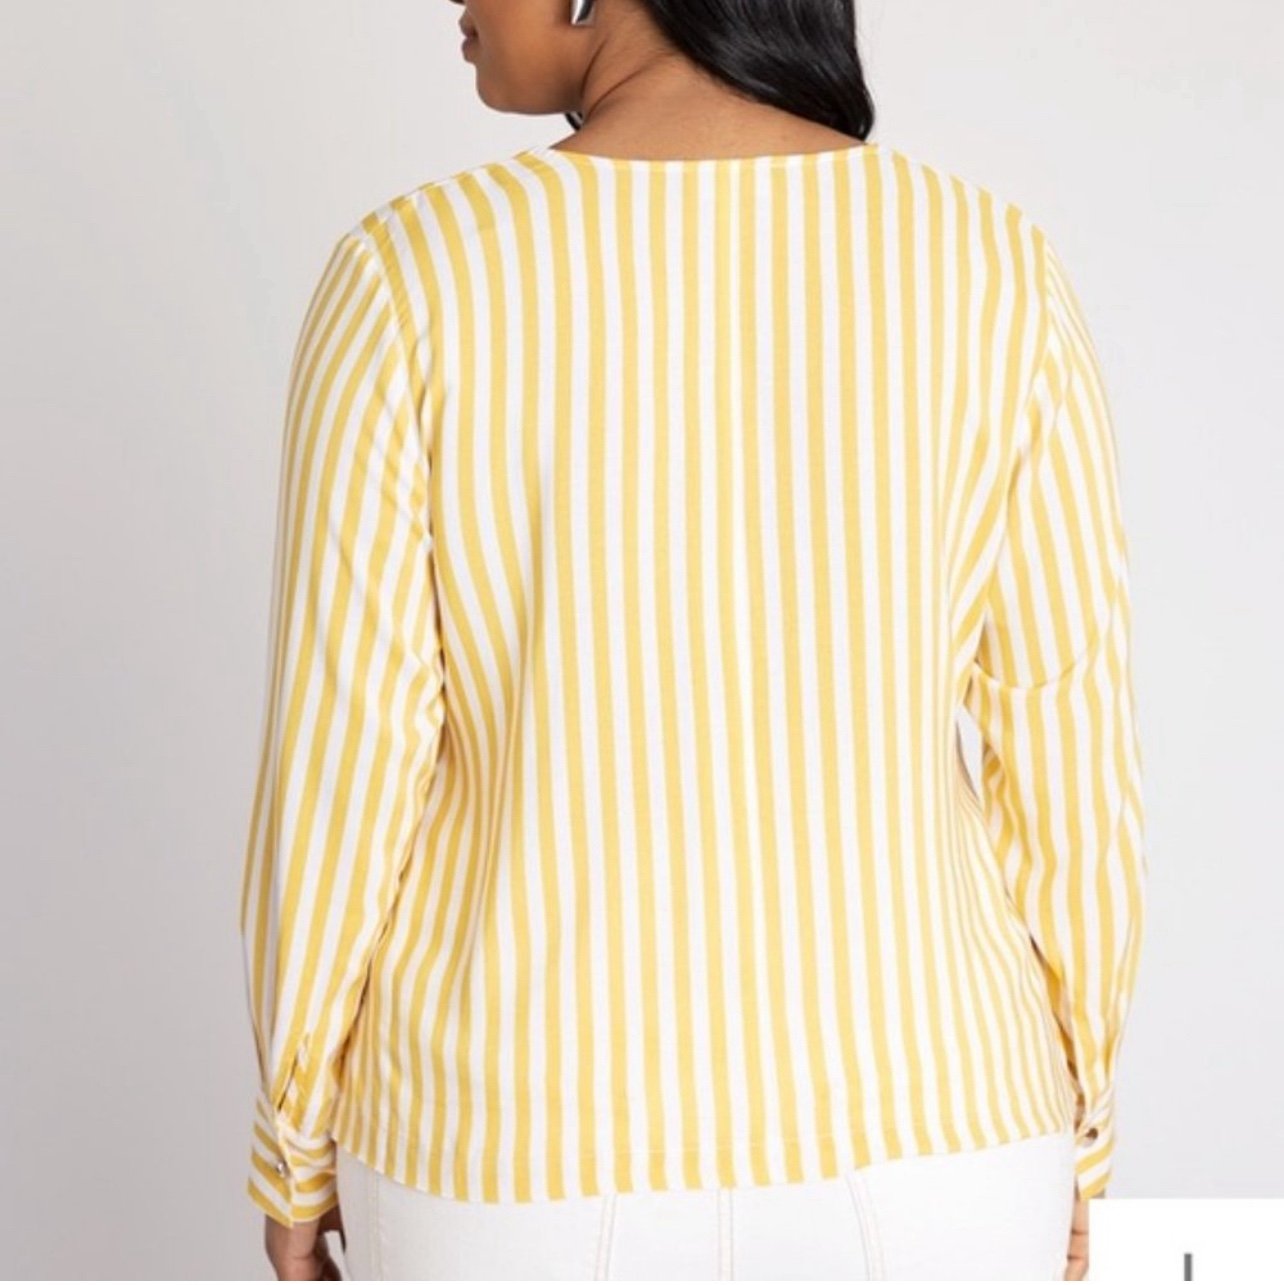 Special offer  NEW Eloquii Yellow Striped Crossover Blouse Top MMkFWXmls Great